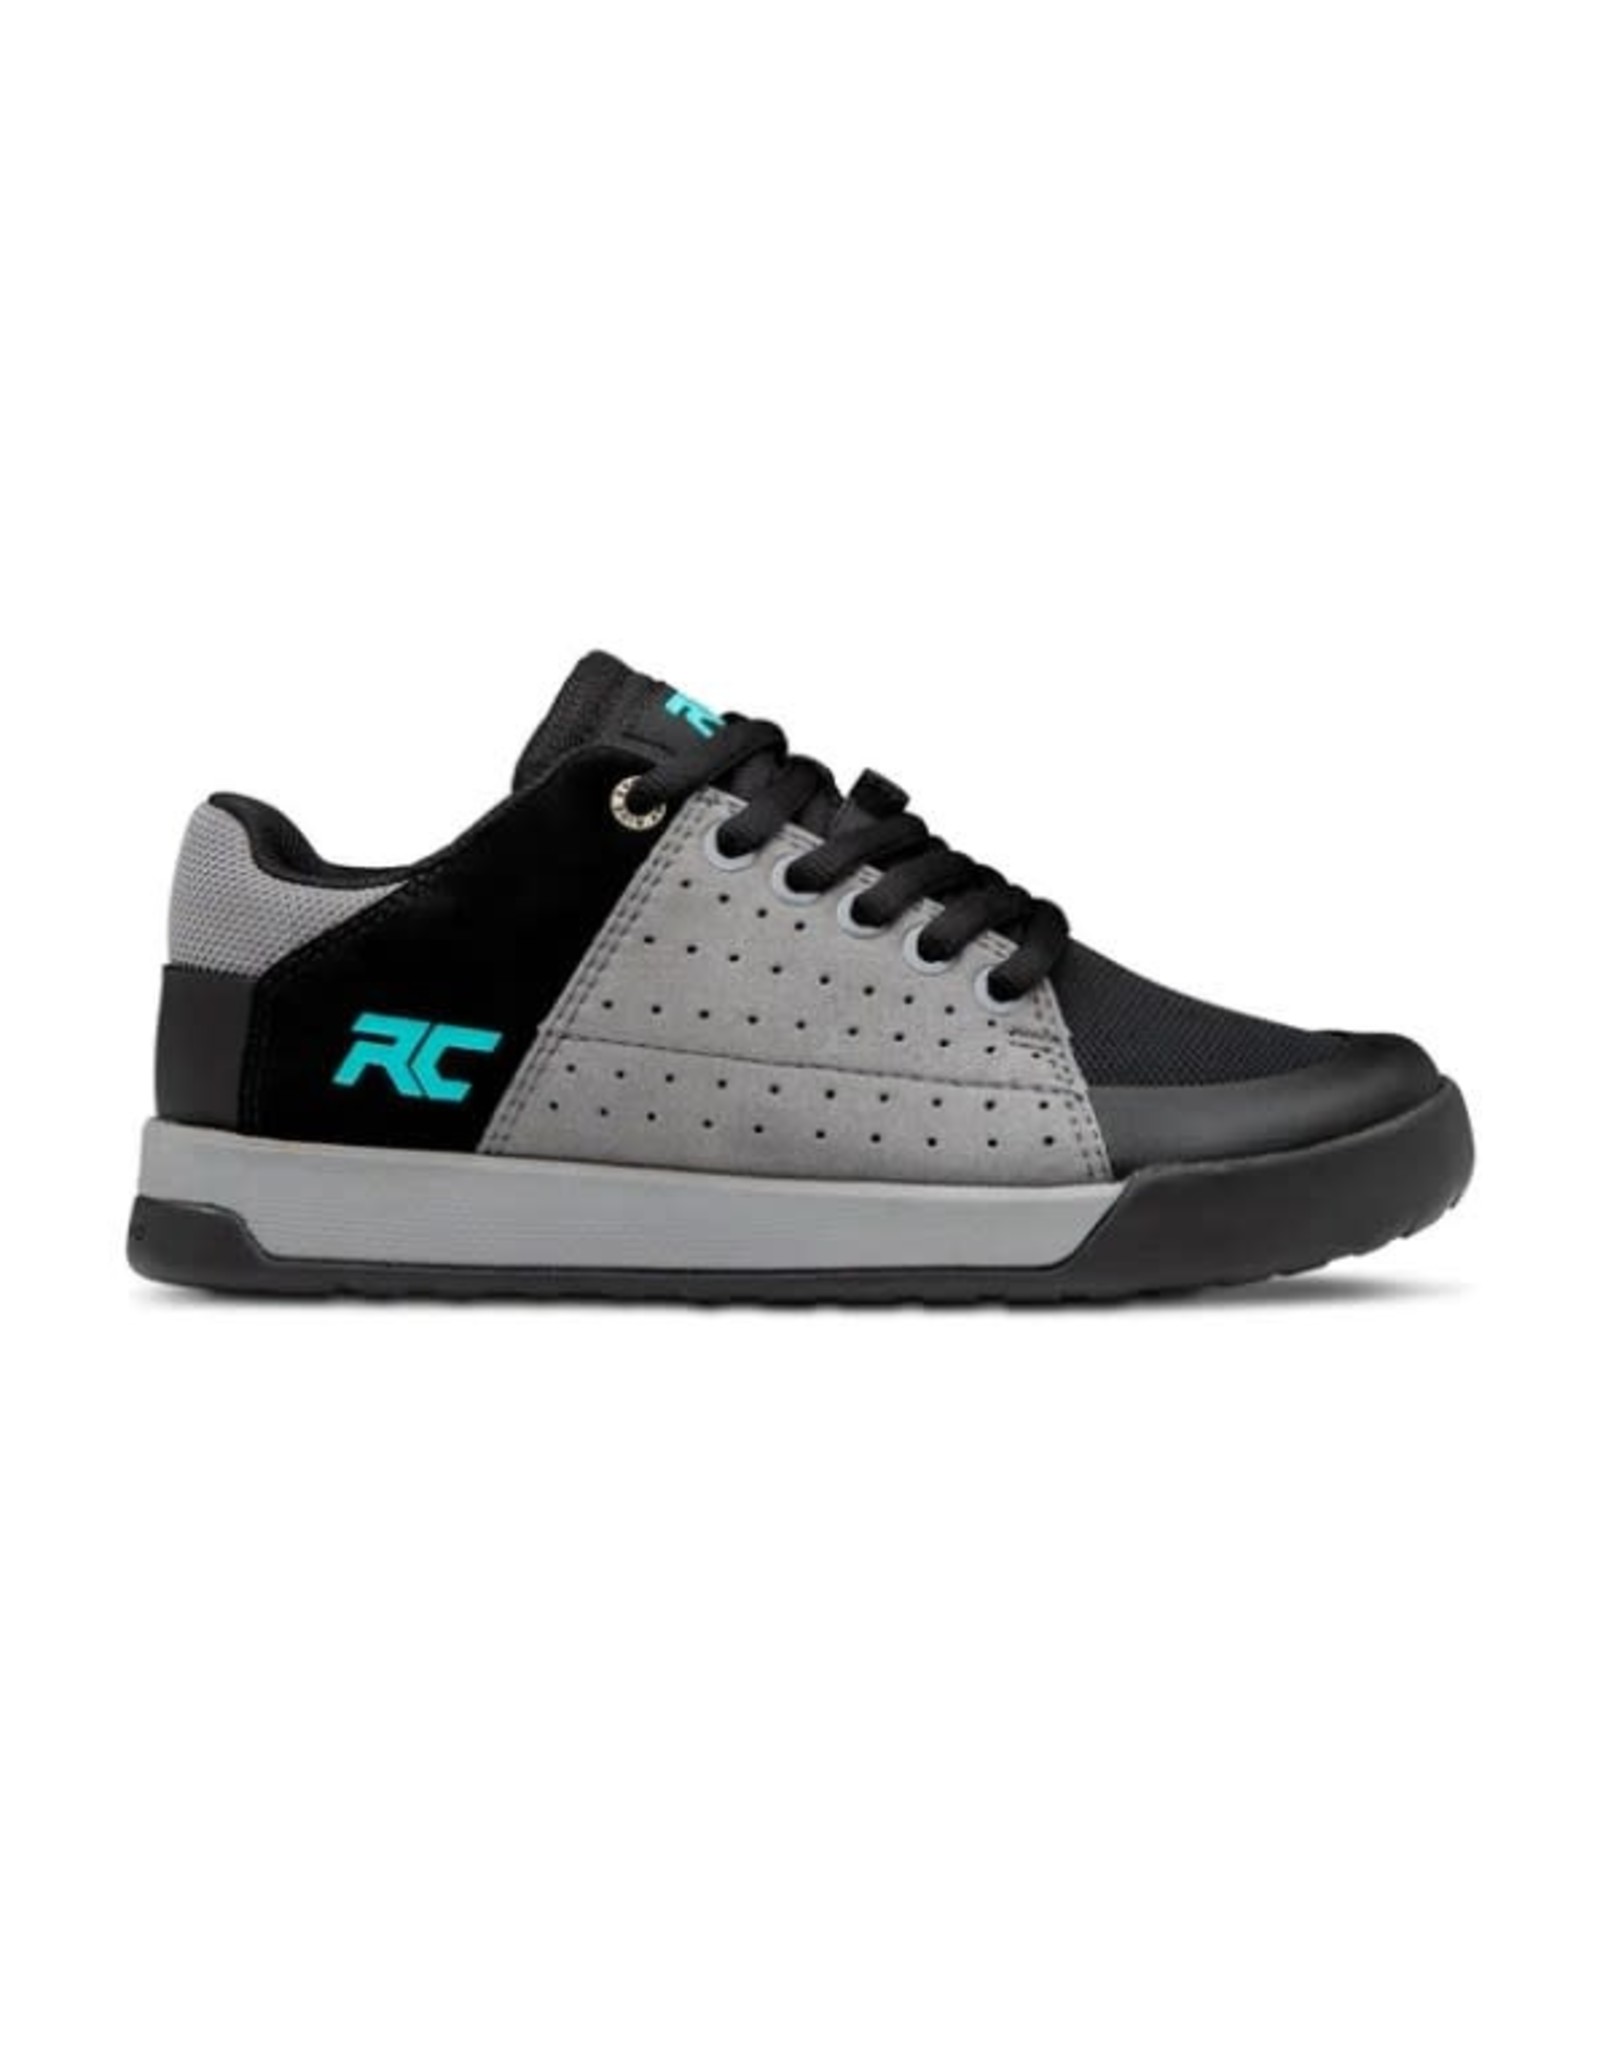 Ride Concepts Shoes RC Livewire youth (new)